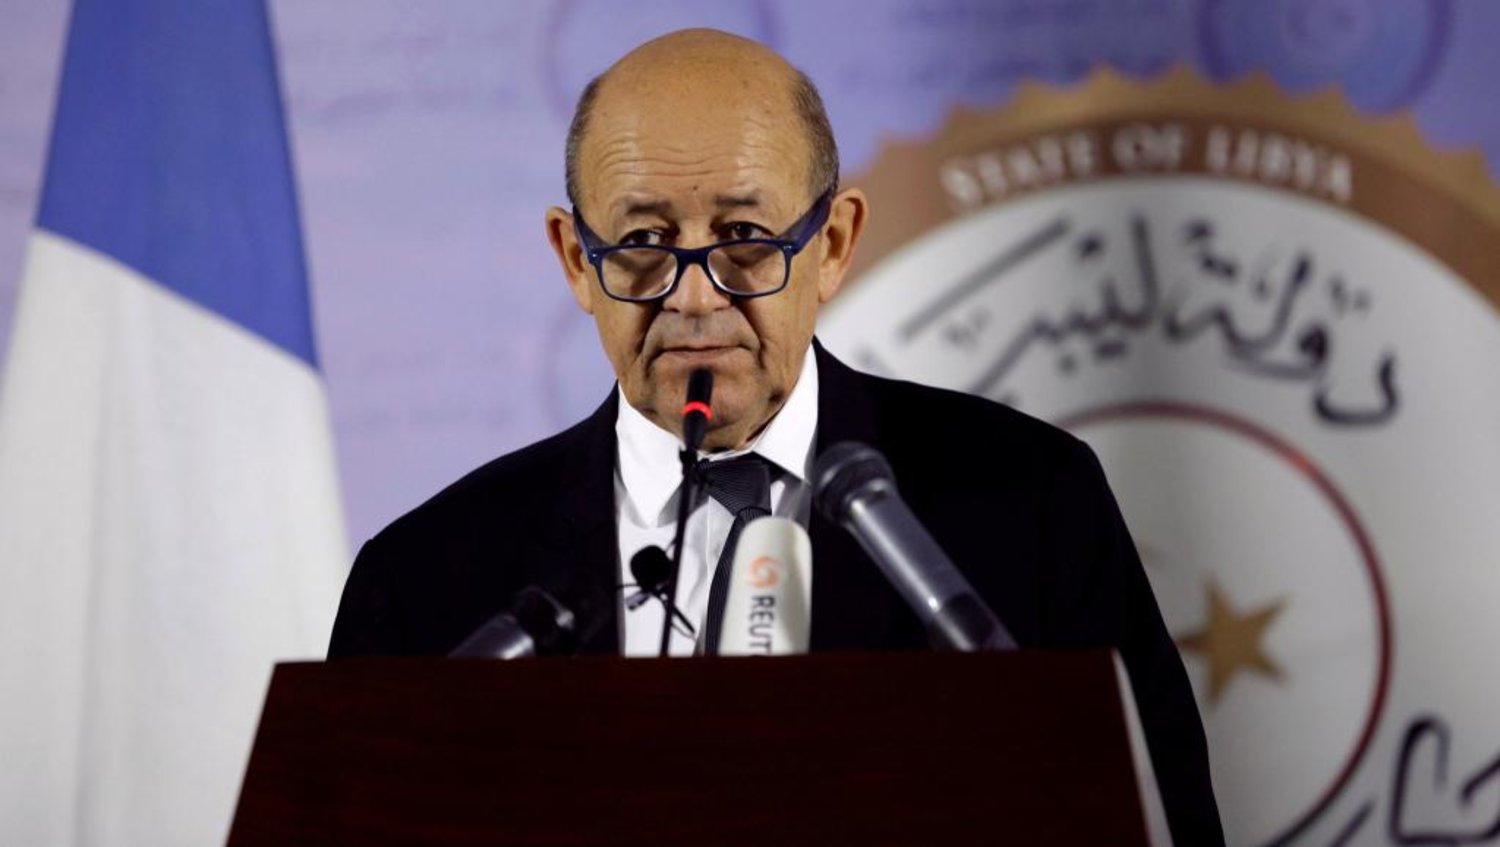 French Foreign Affairs Minister Jean-Yves Le Drian in Tripoli, Libya. Reuters/Ismail Zitouny